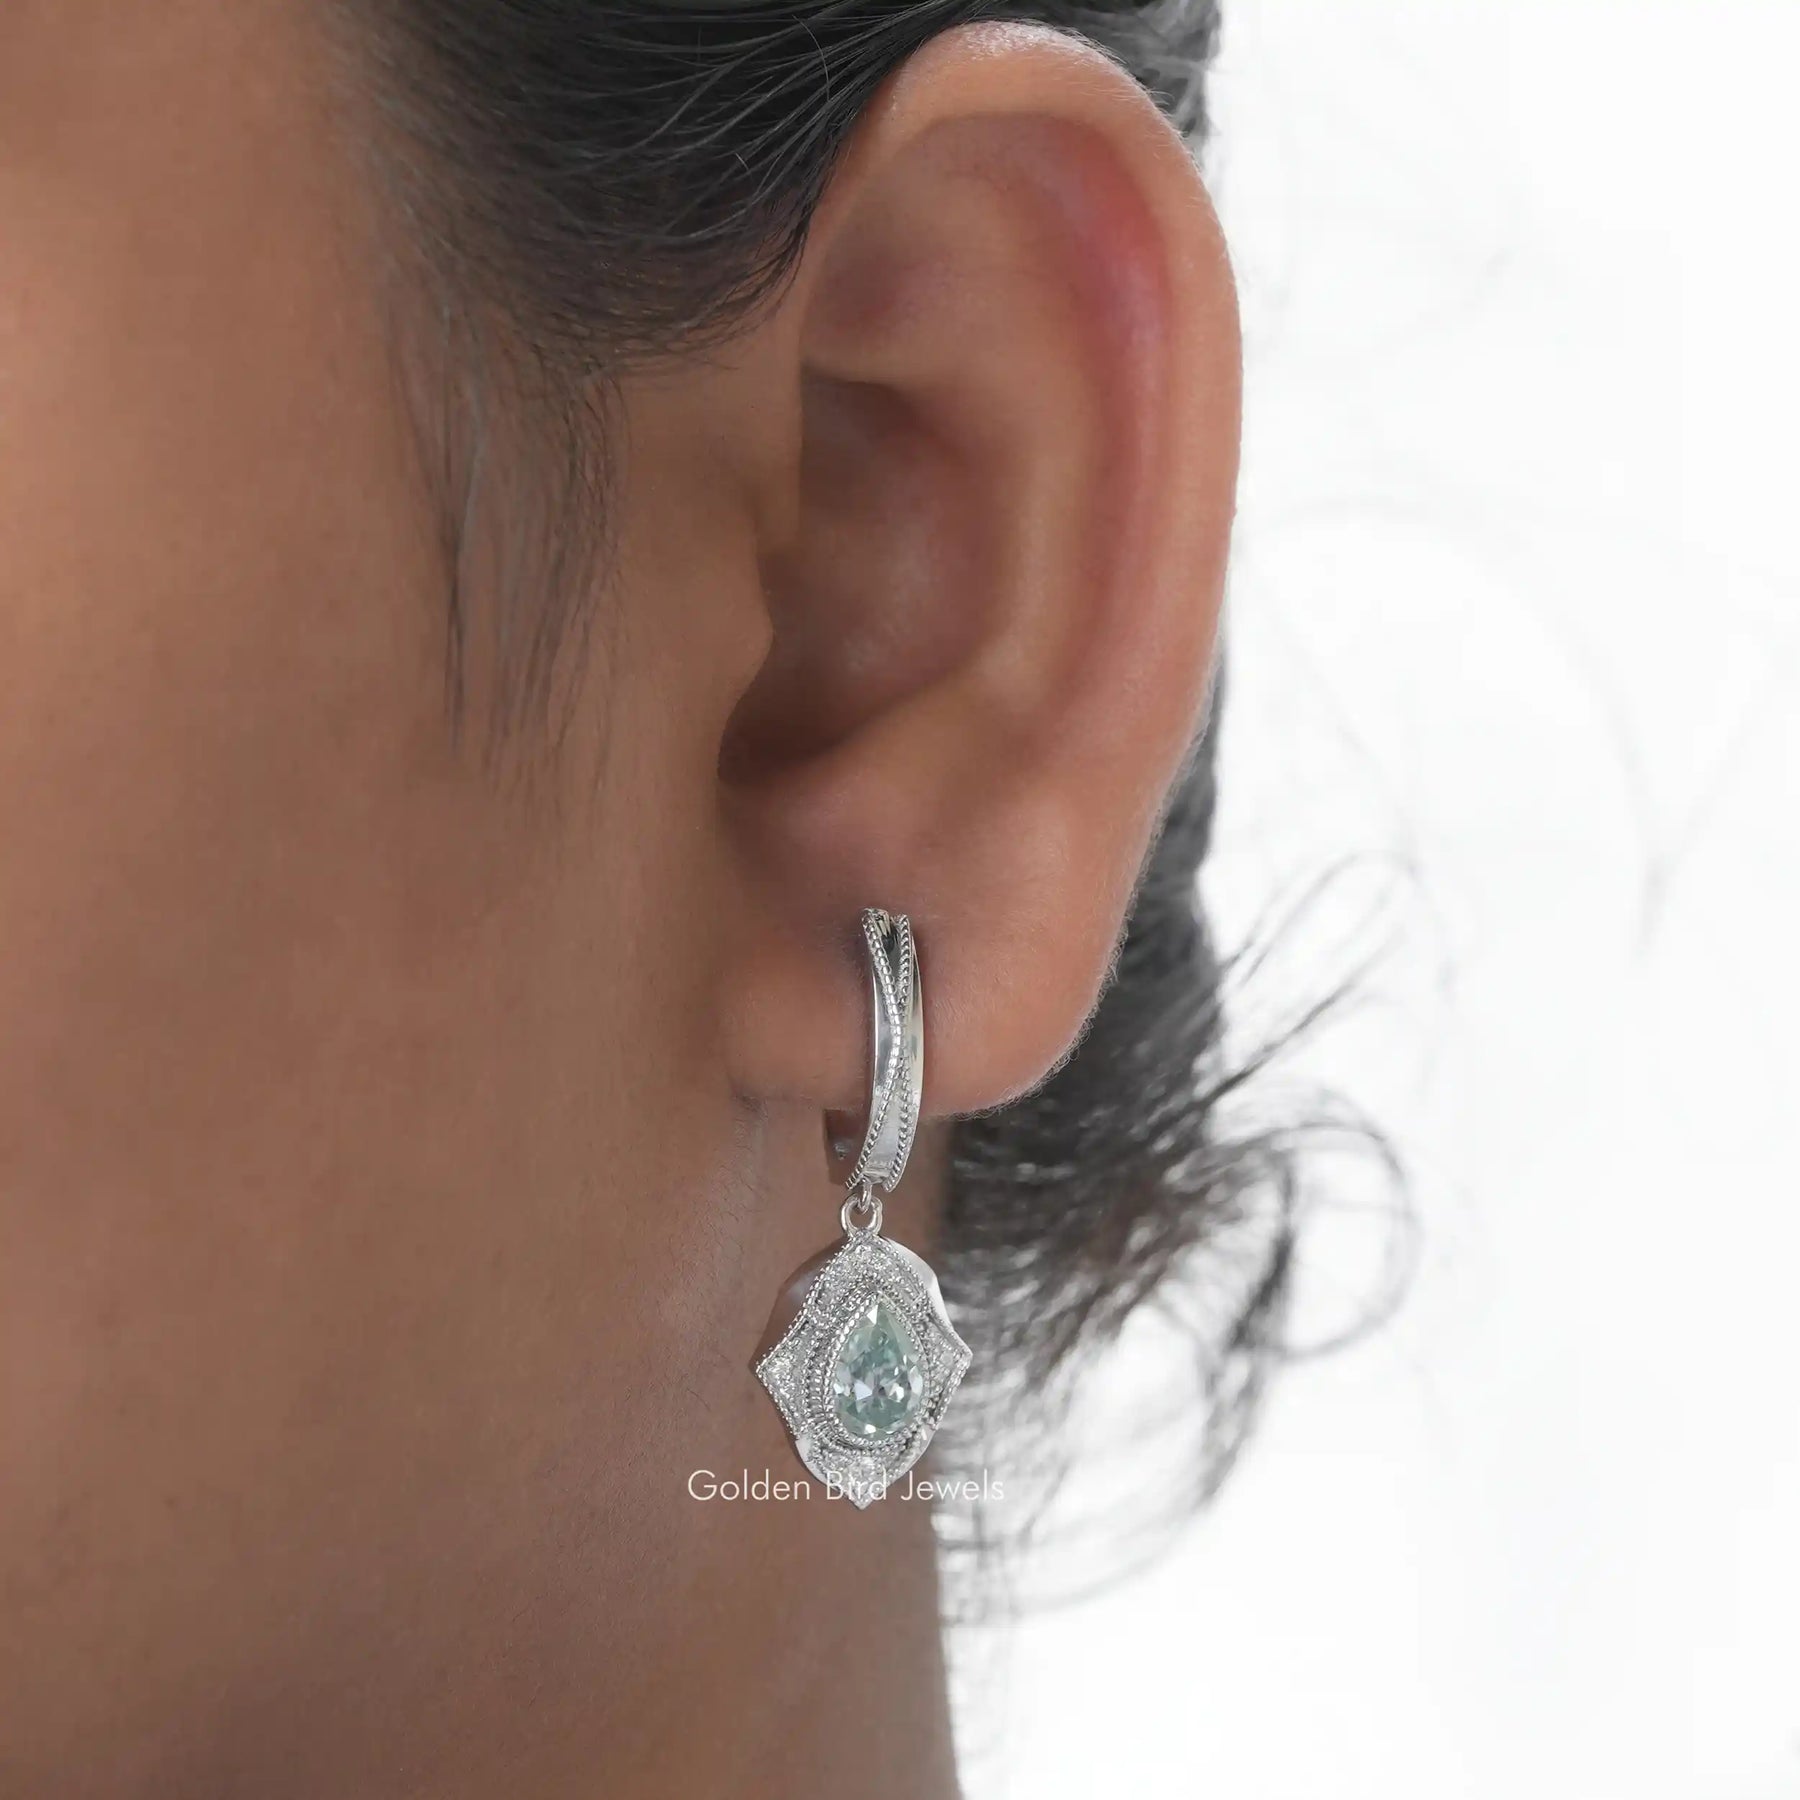 [In ear front view of dangle earrings maade of round cut side stones]-[Golden Bird Jewels]